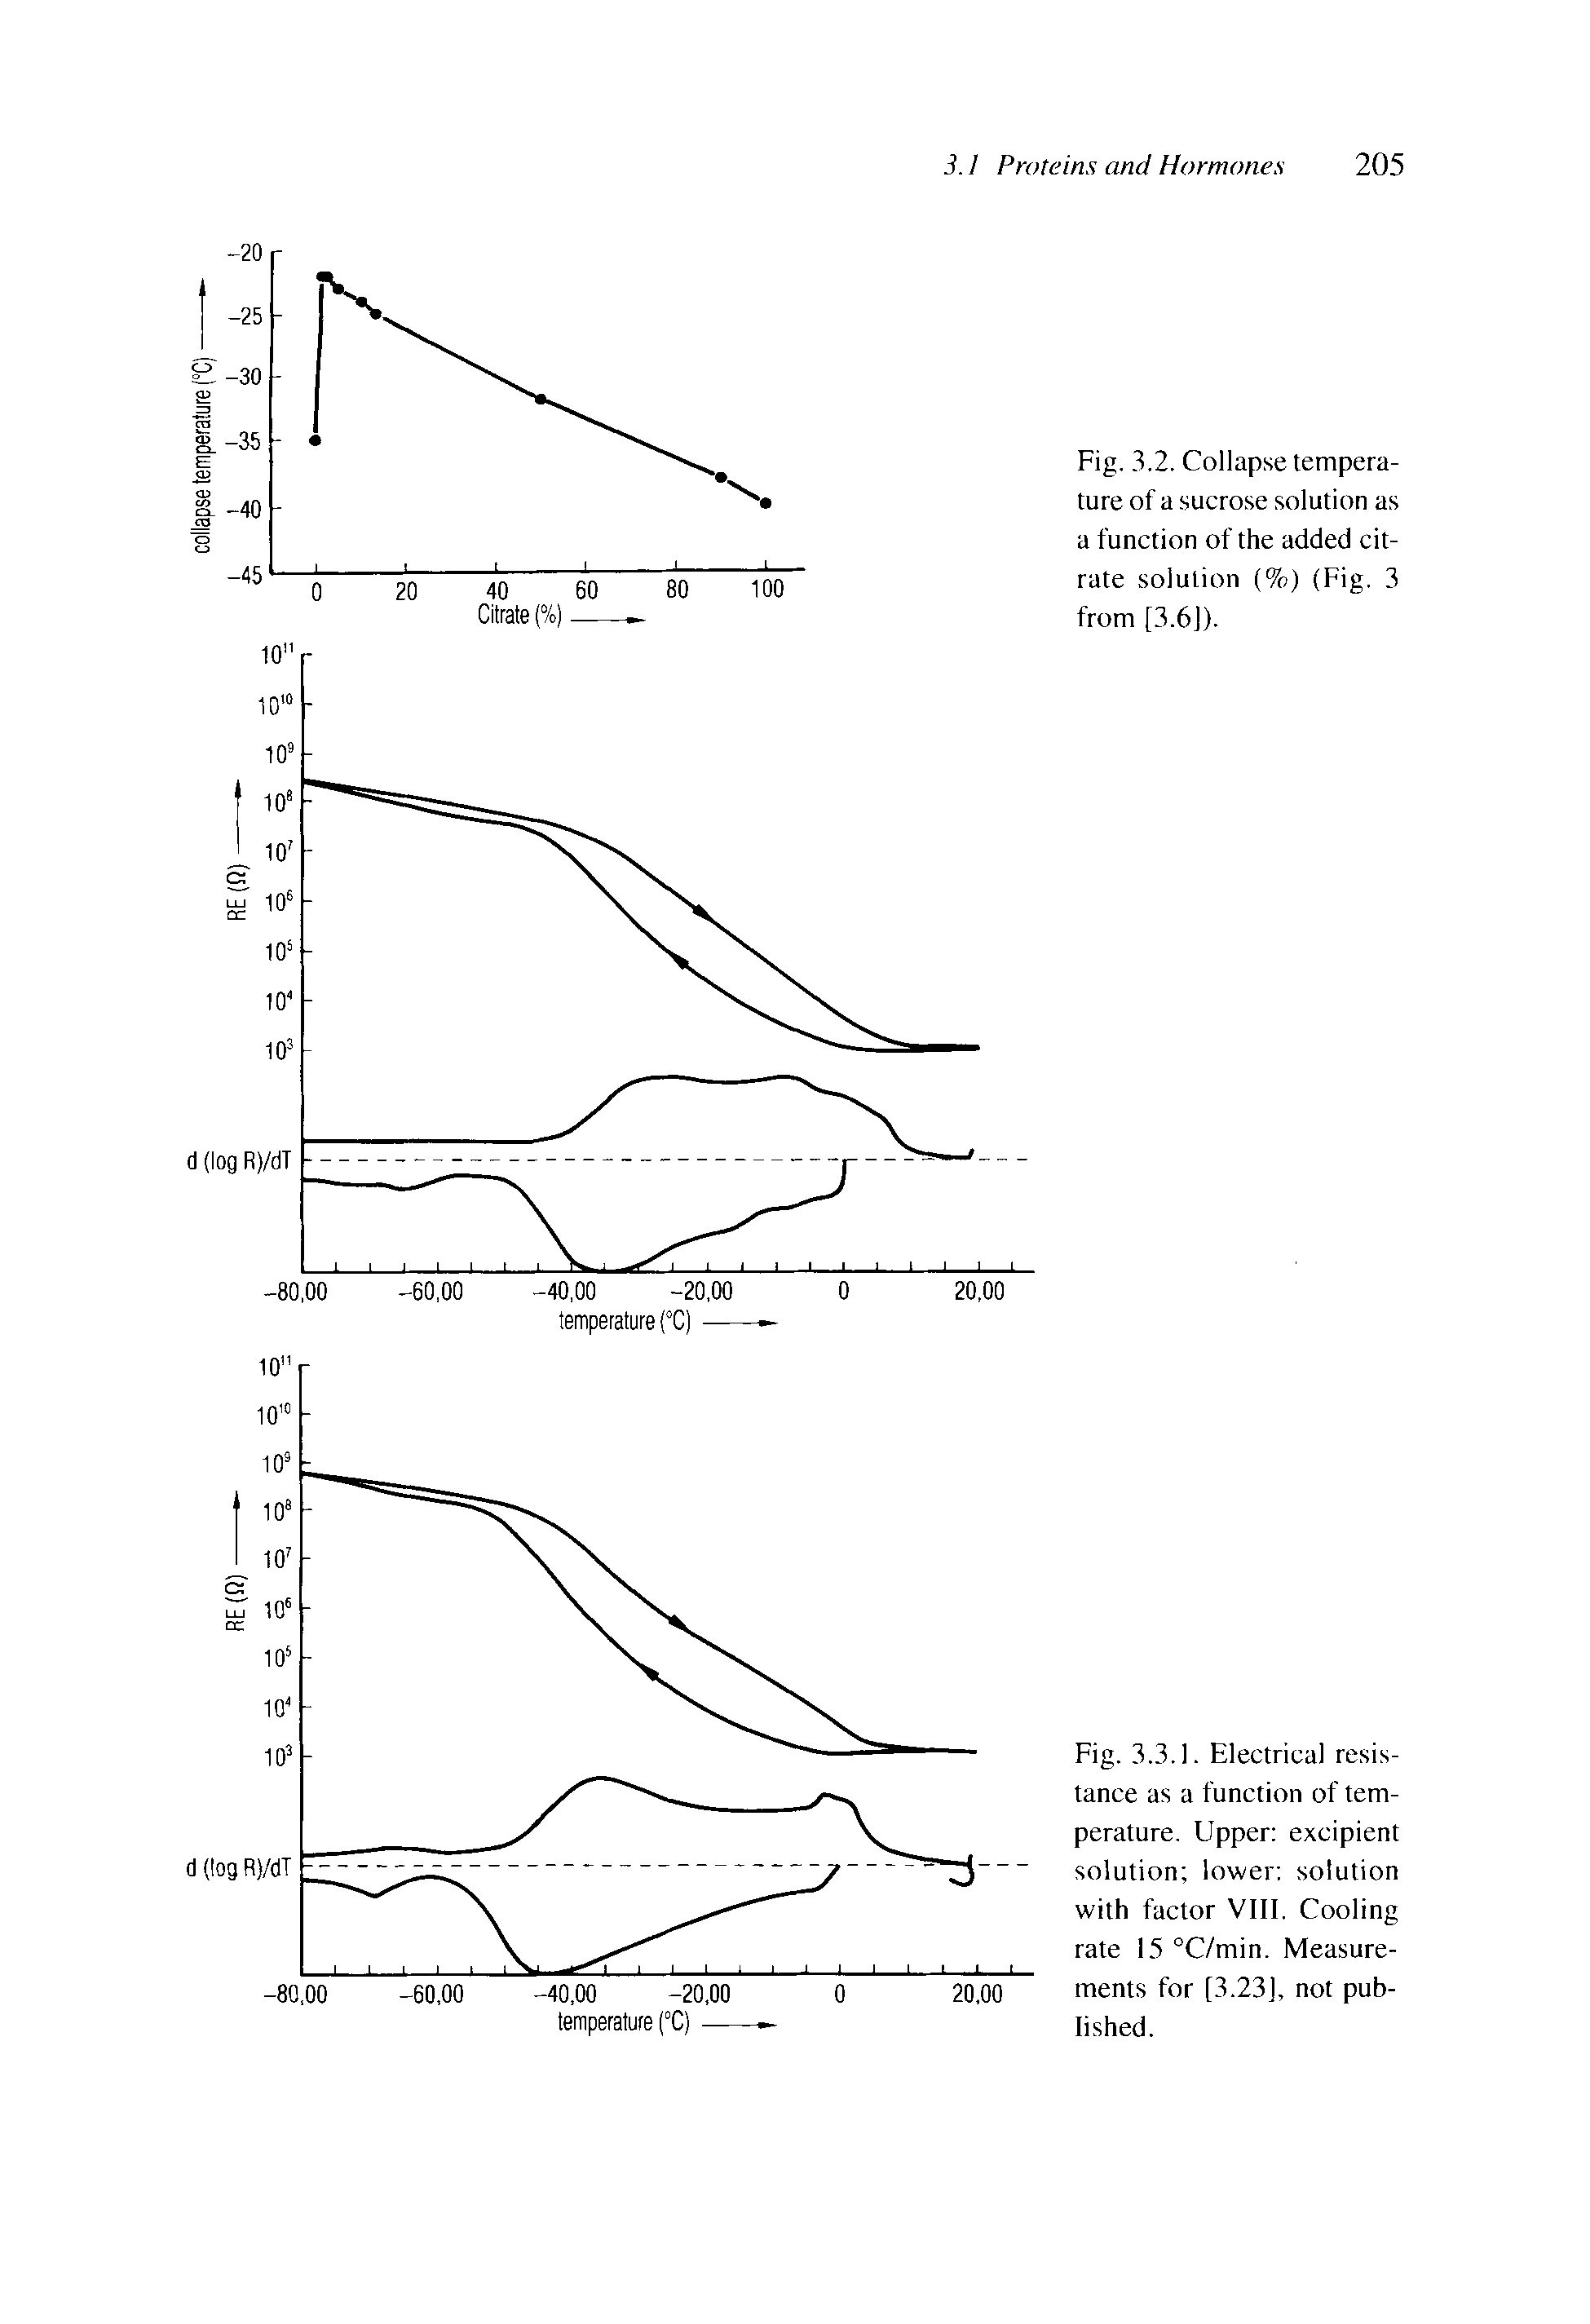 Fig. 3.3.1. Electrical resistance as a function of temperature. Upper excipient solution lower solution with factor VIII. Cooling rate 15 °C/min. Measurements for [3.23], not published.